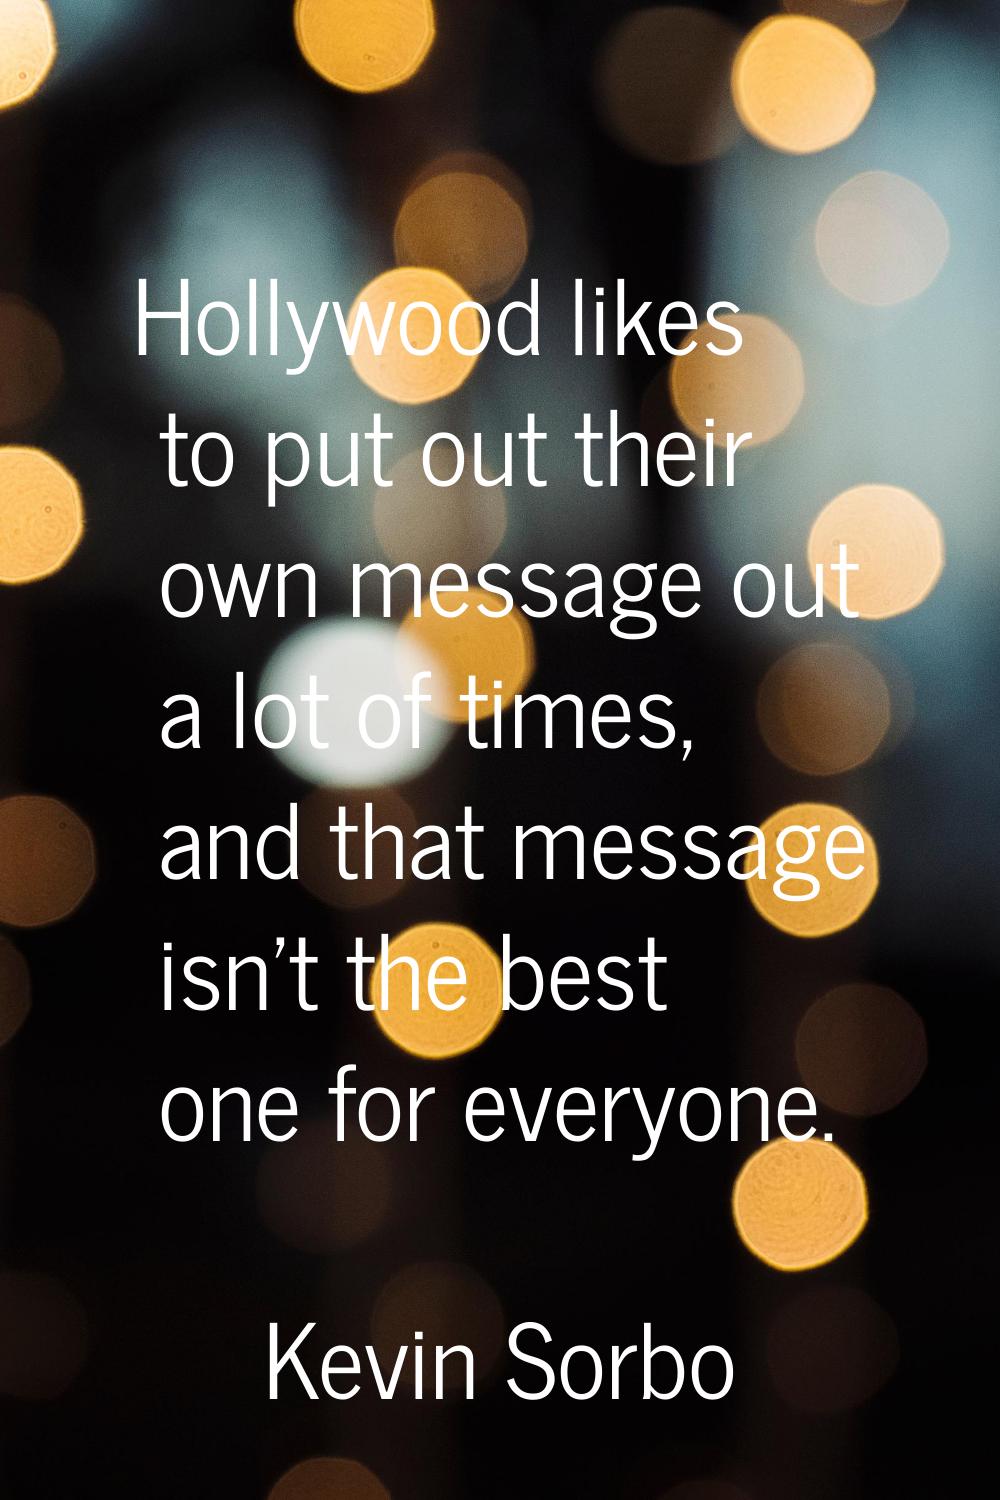 Hollywood likes to put out their own message out a lot of times, and that message isn't the best on